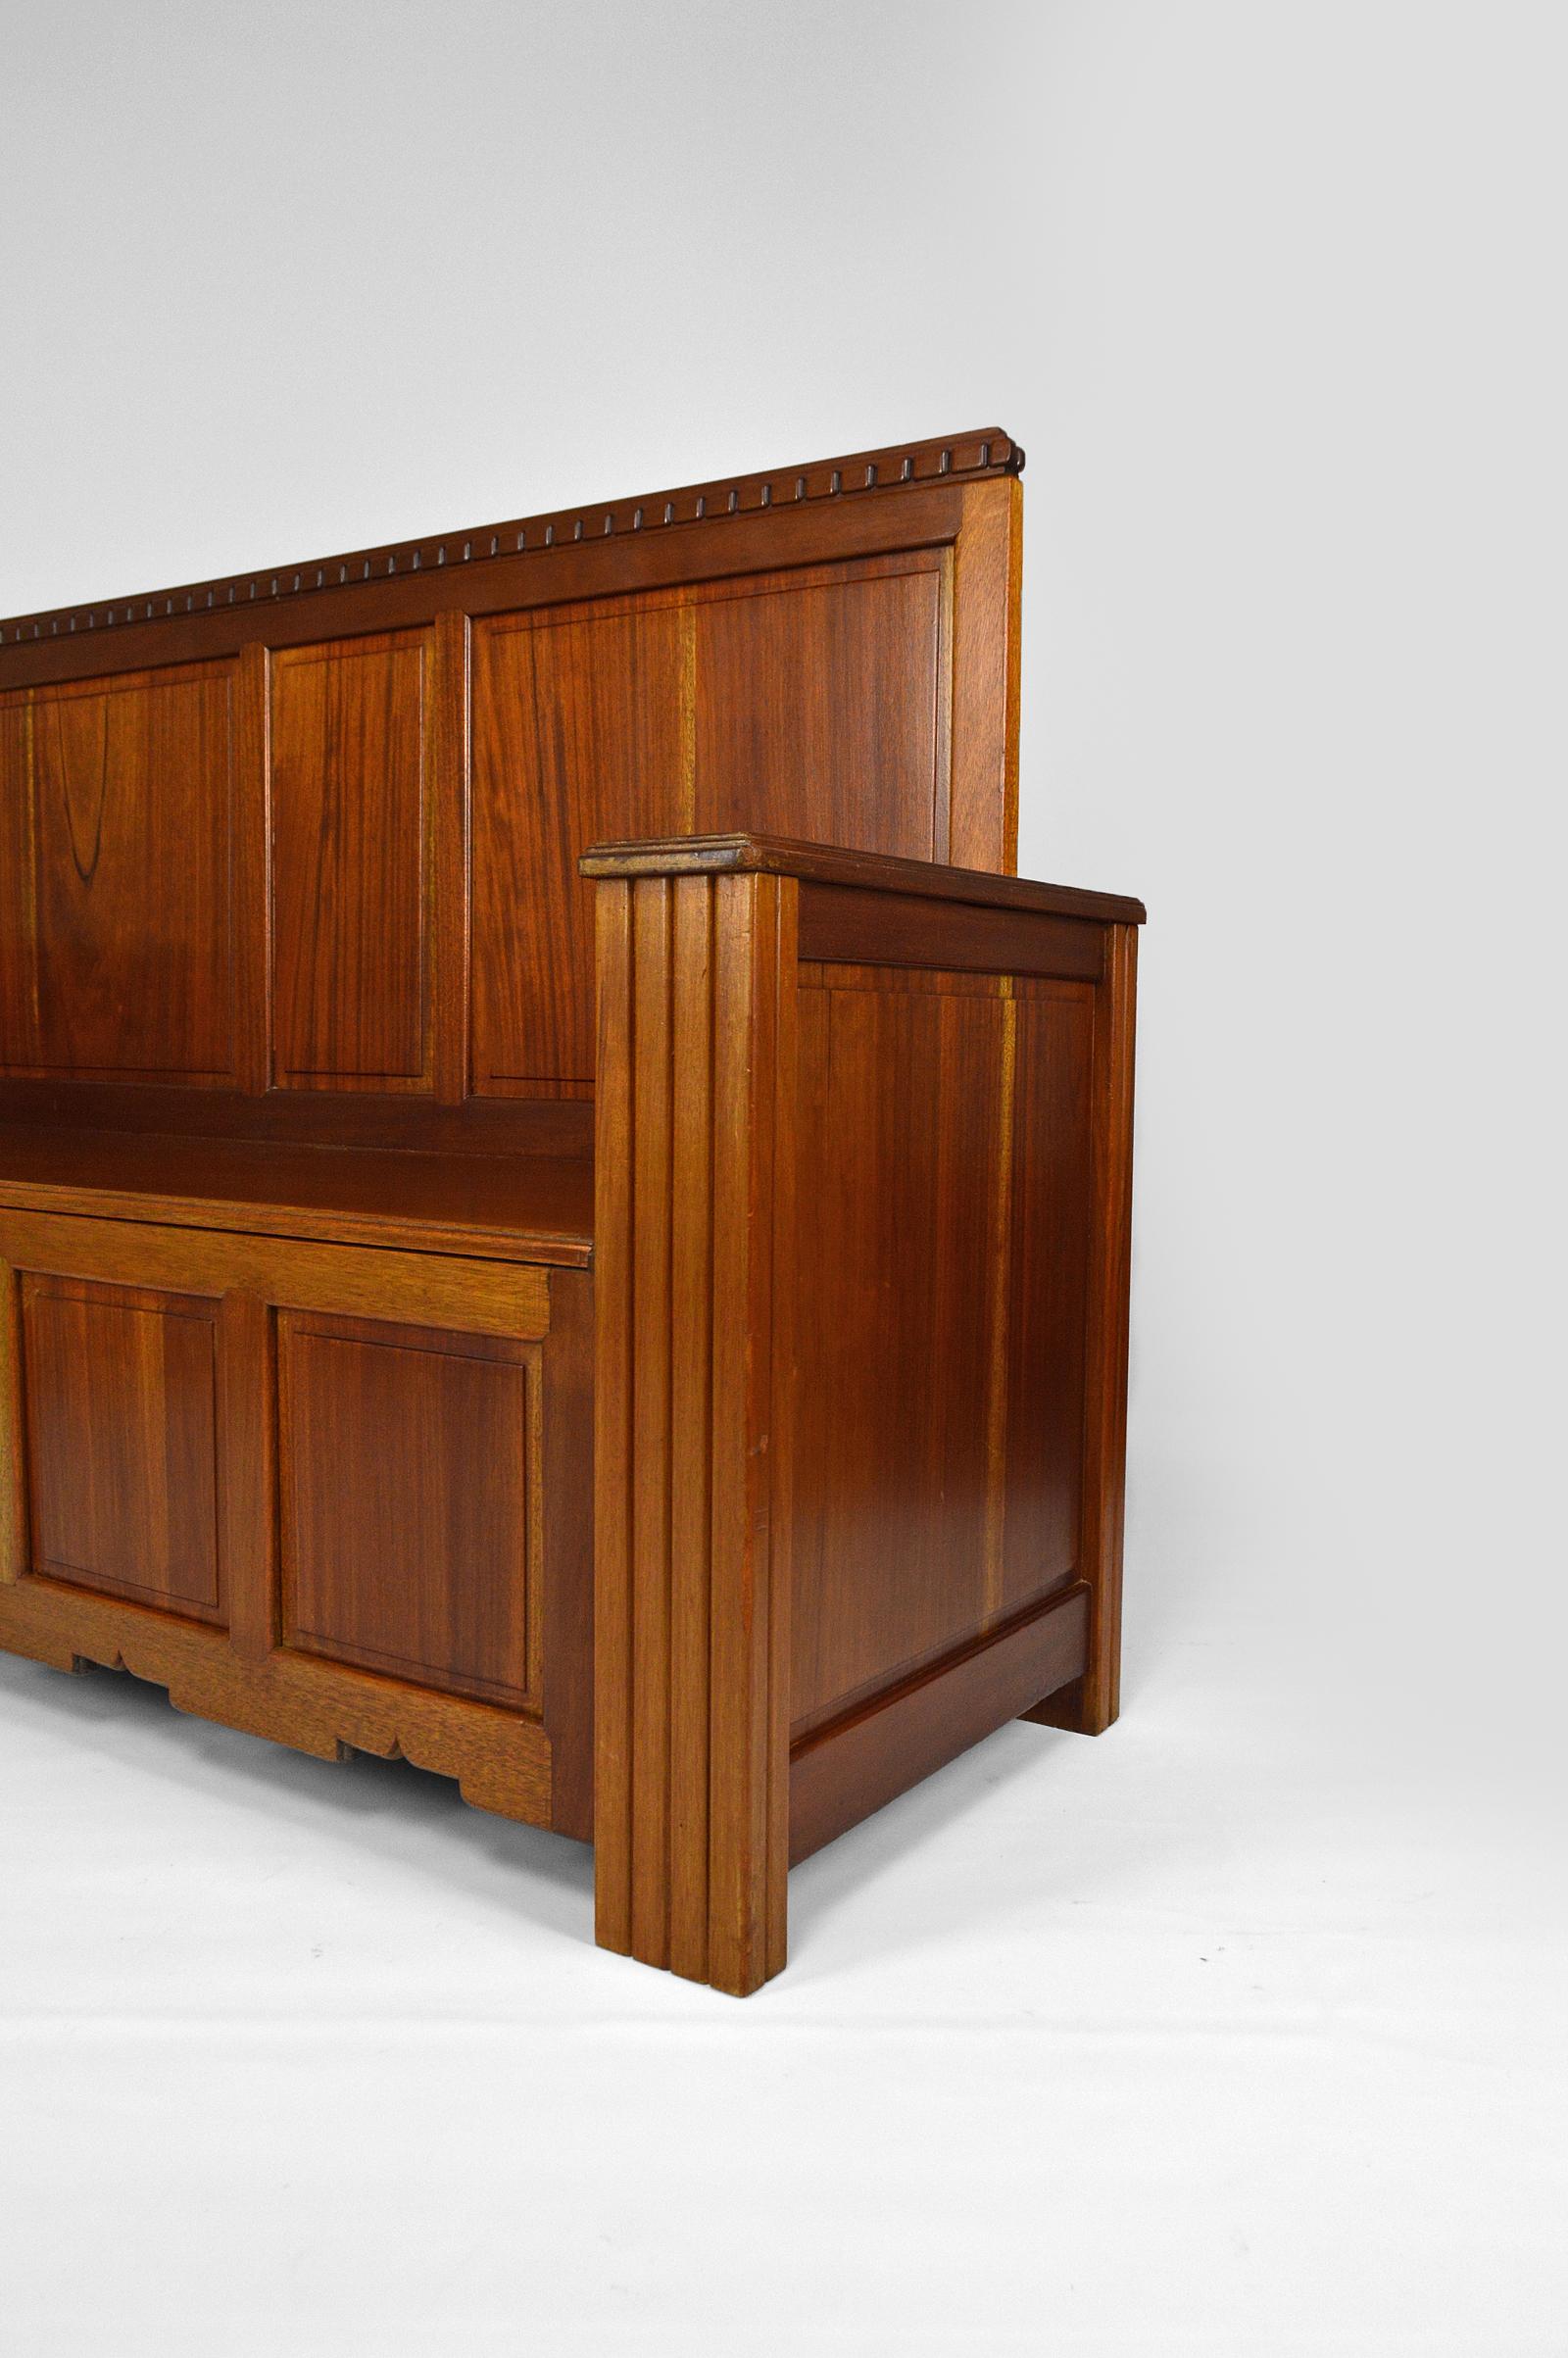 Art Deco Hall Chest Bench by Clement Goyeneche in Mahogany, France, 1930s For Sale 2